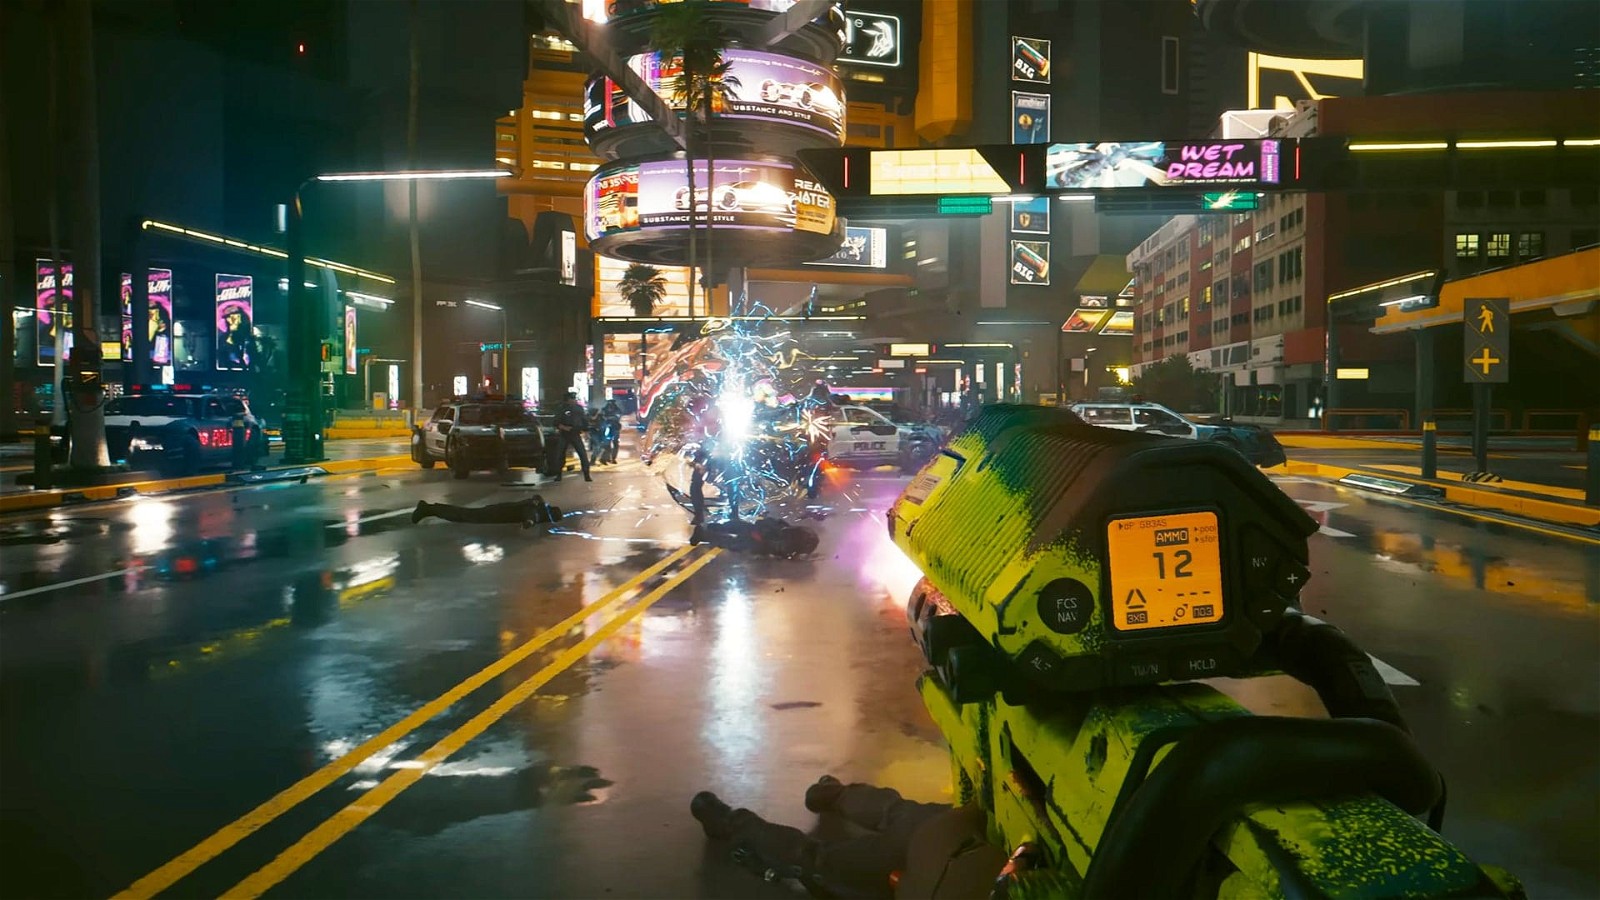 Cyberpunk 2077 will also bring new features and QoL updates with Update 2.0